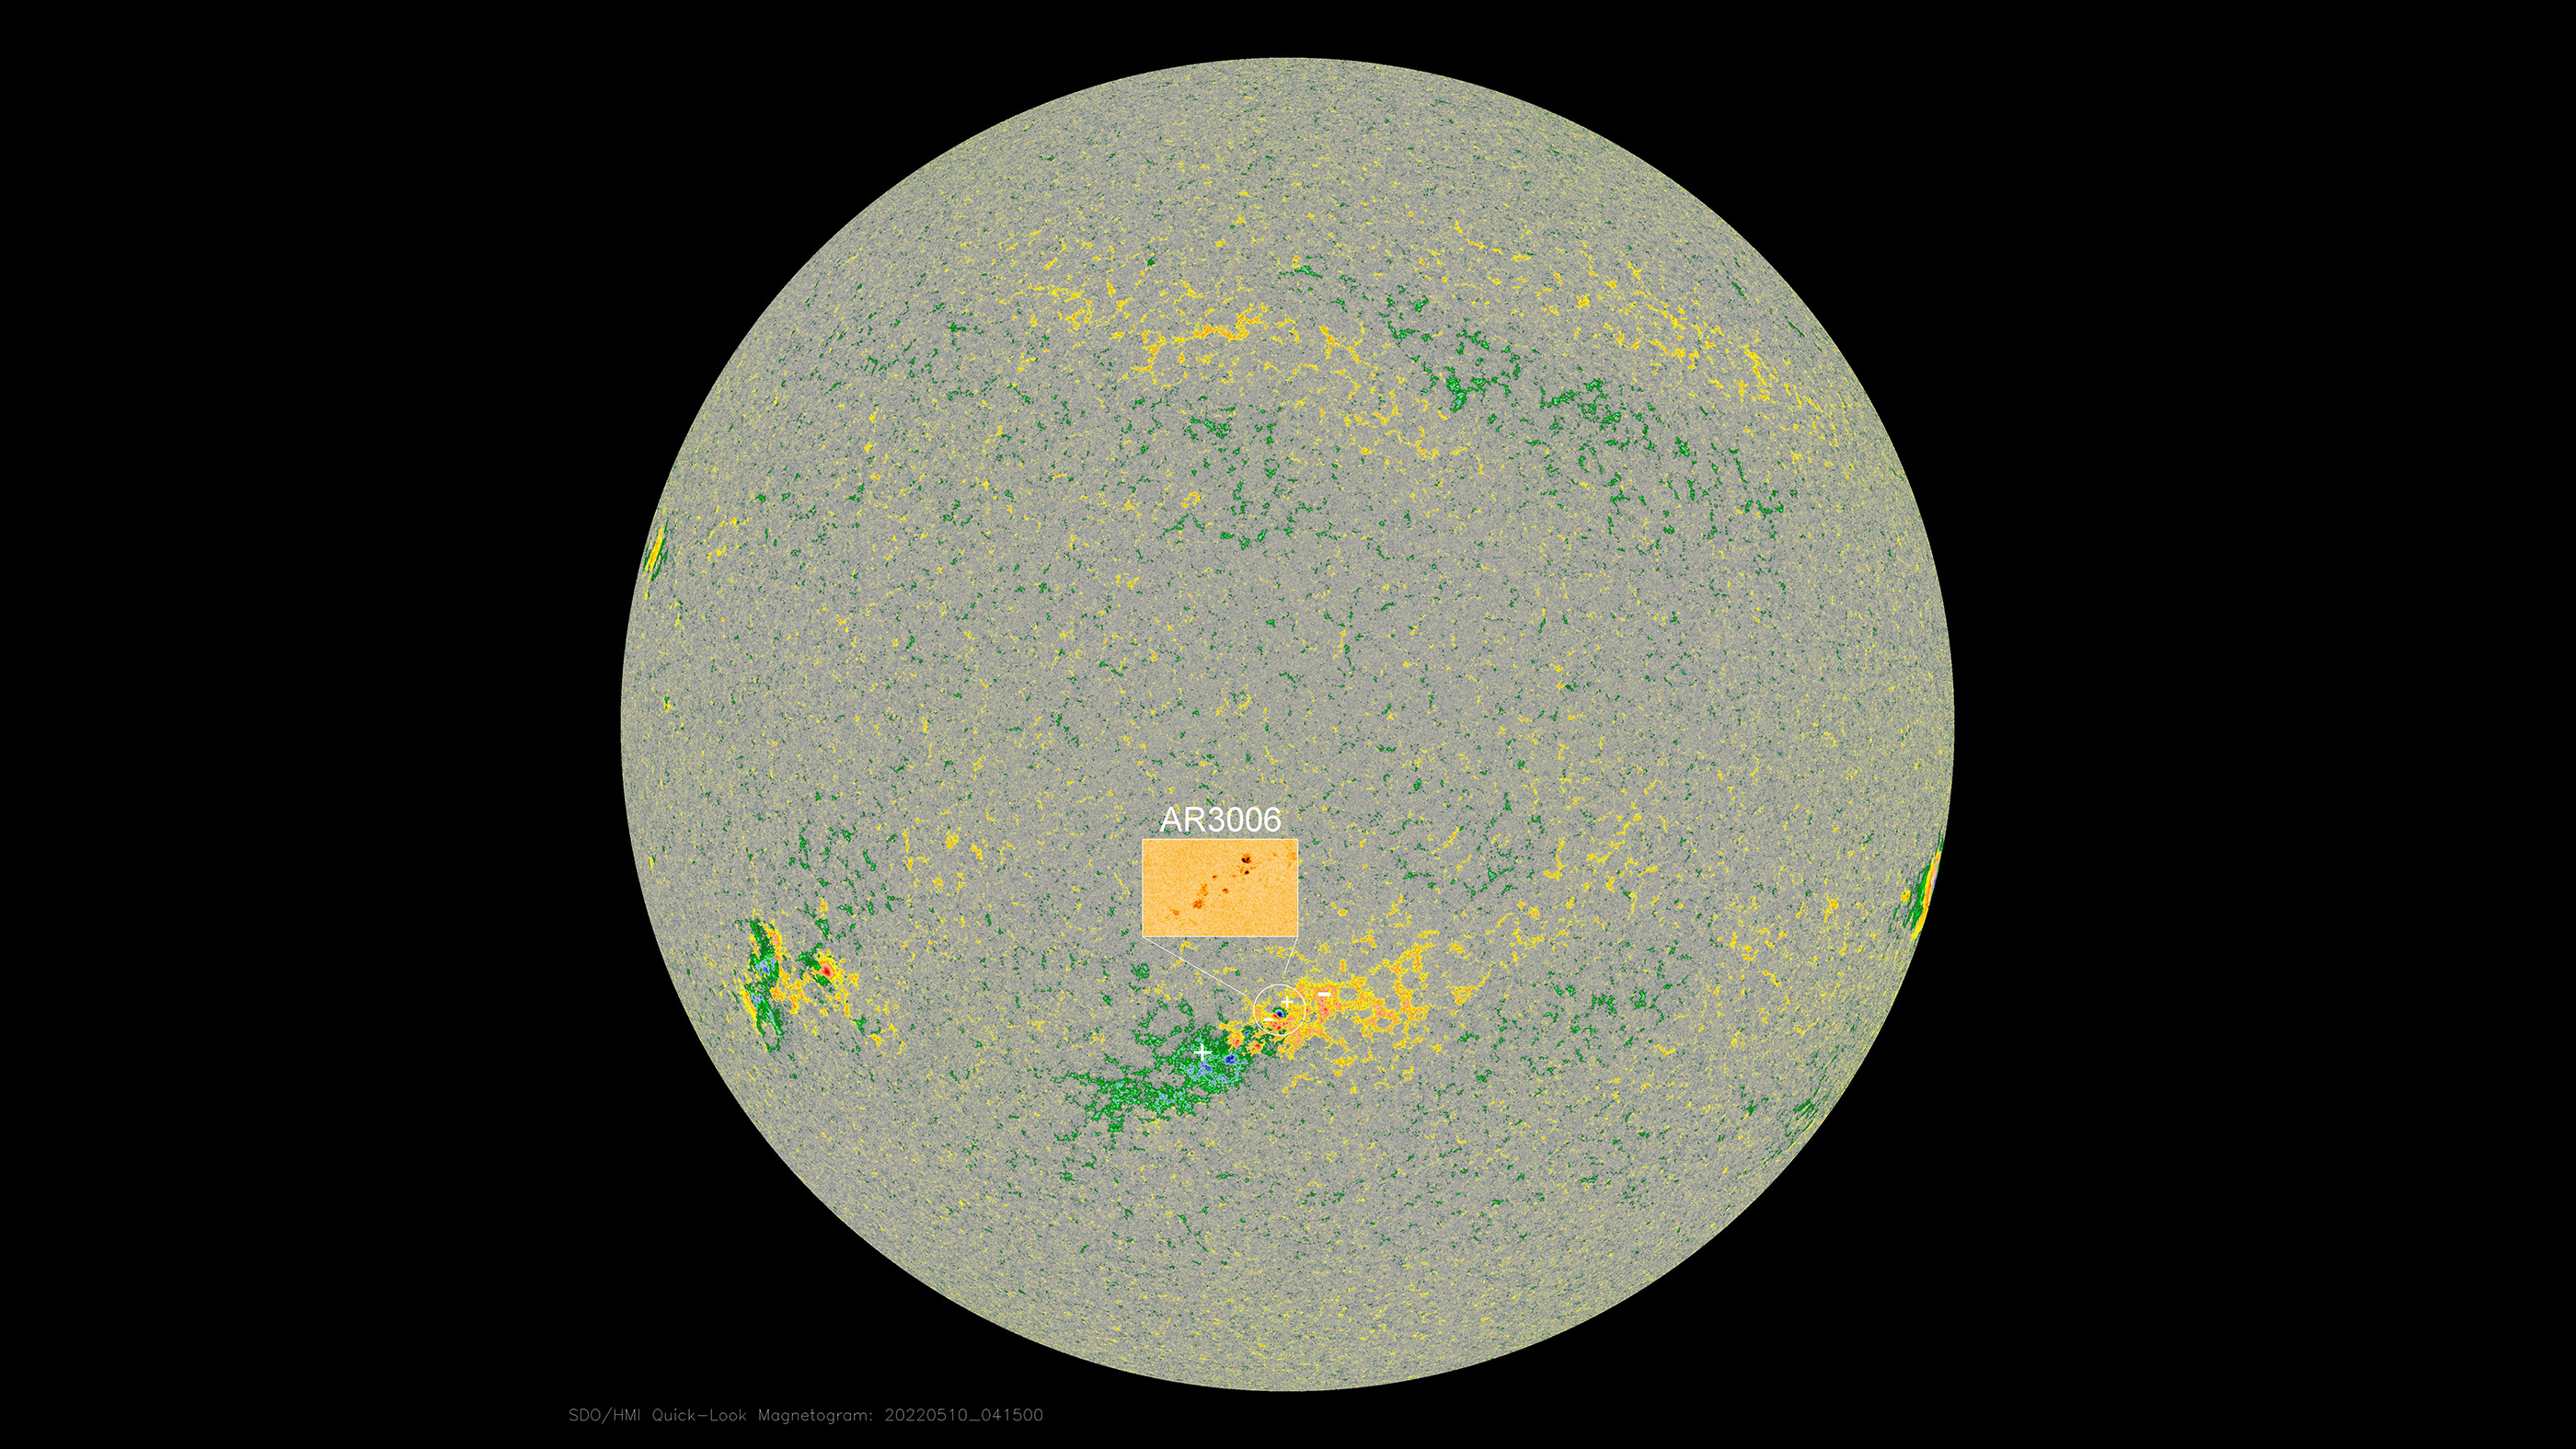 Sunspot region AR3006 was first seen a few days ago and has now rotated to near the center of the sun's visible disk, pointing almost directly at Earth.